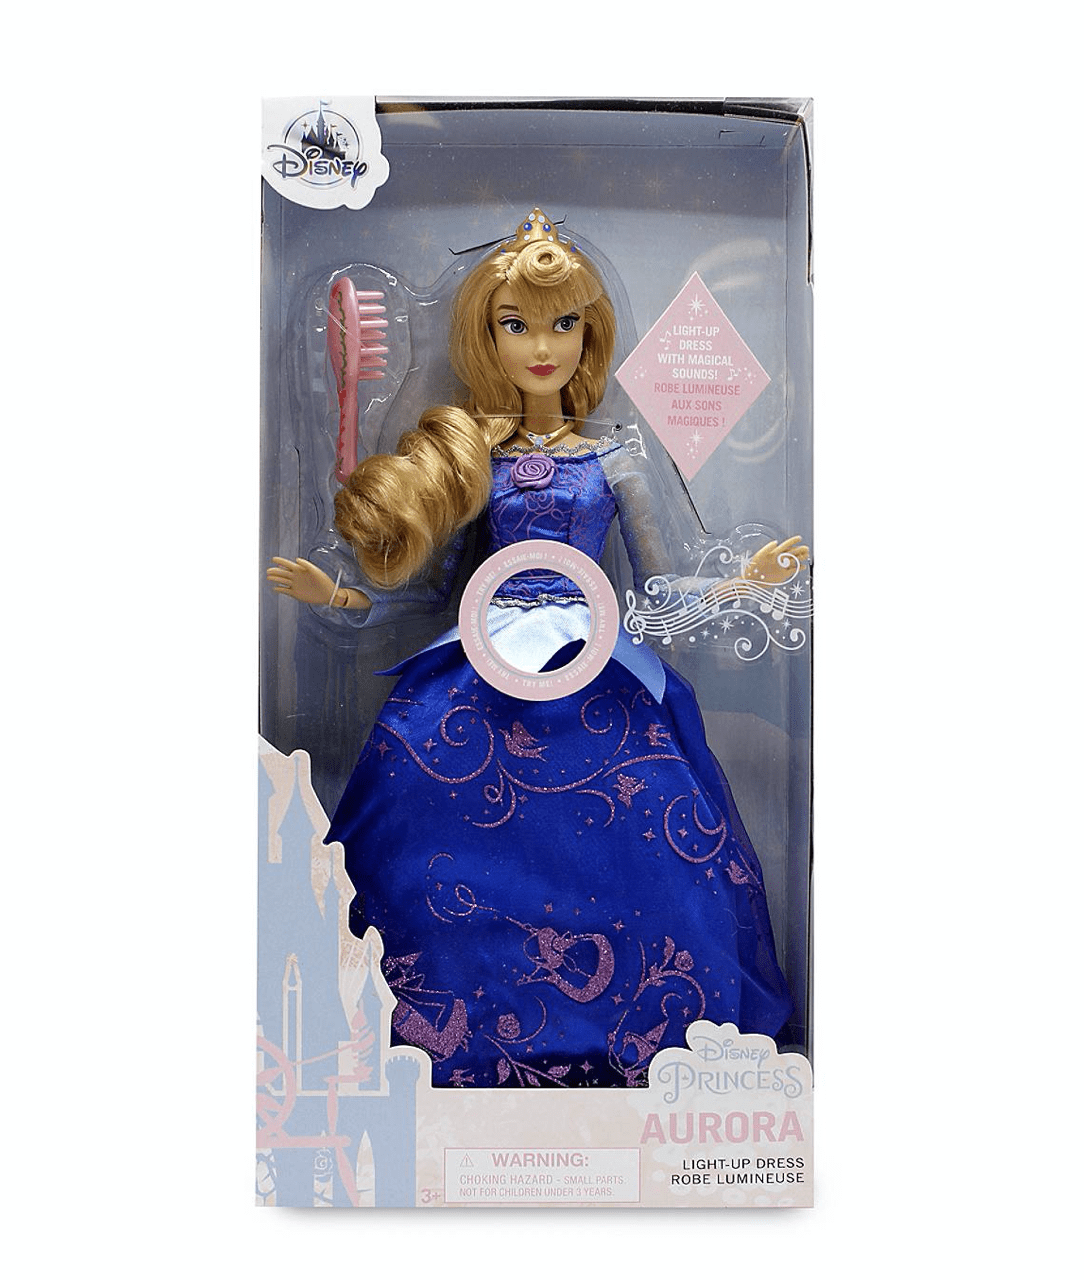 Disney Store Beauty & the Beast Belle Premium Doll with Light-Up Dress and Sound